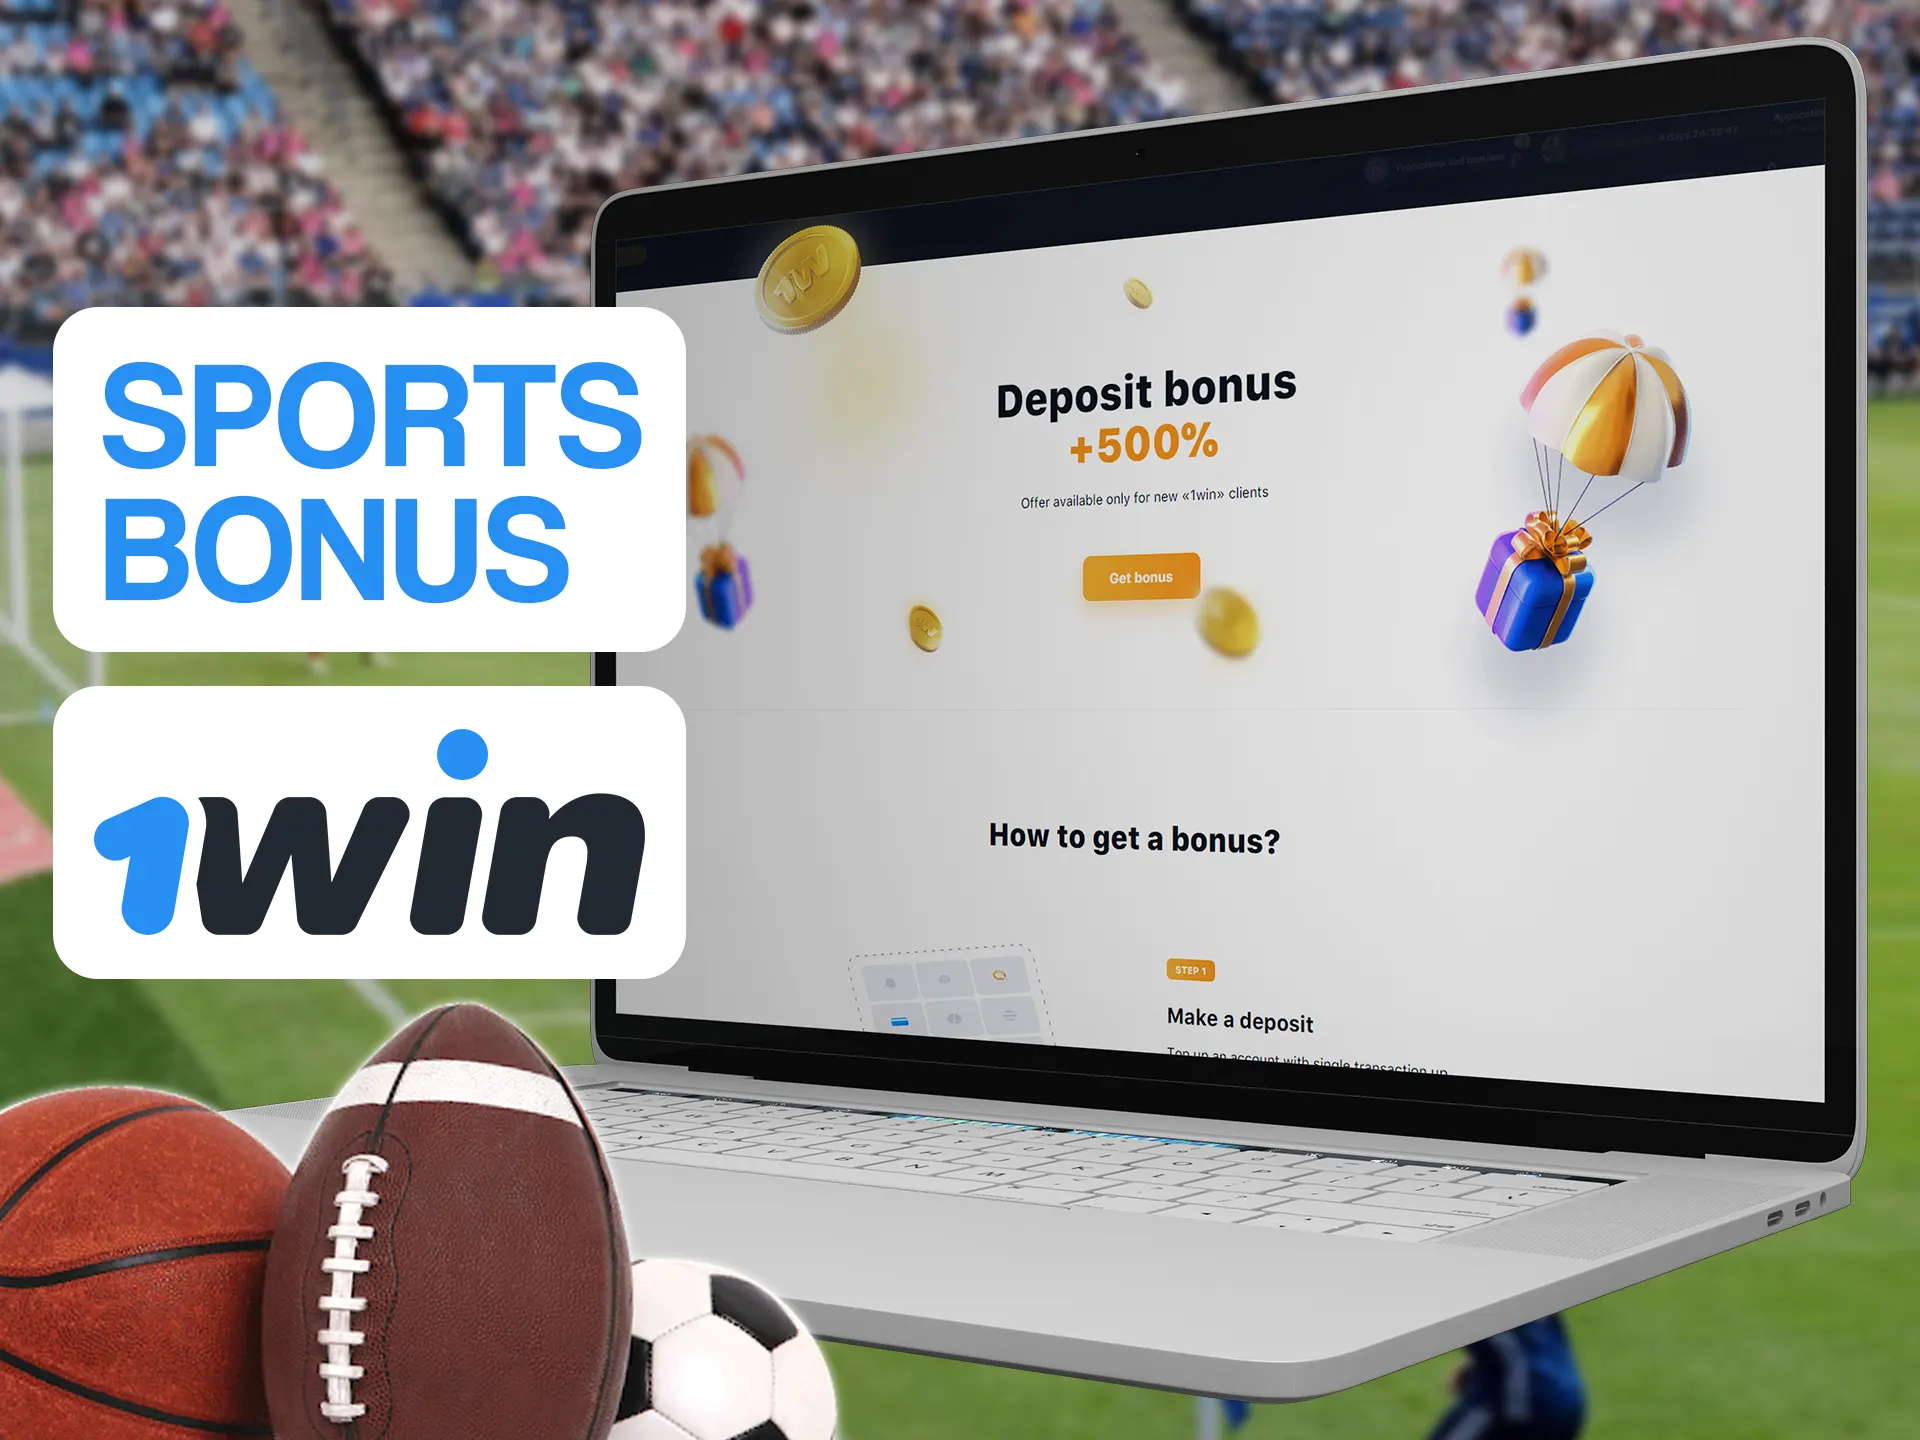 Make your first deposit and get additional money with 1win bonus.